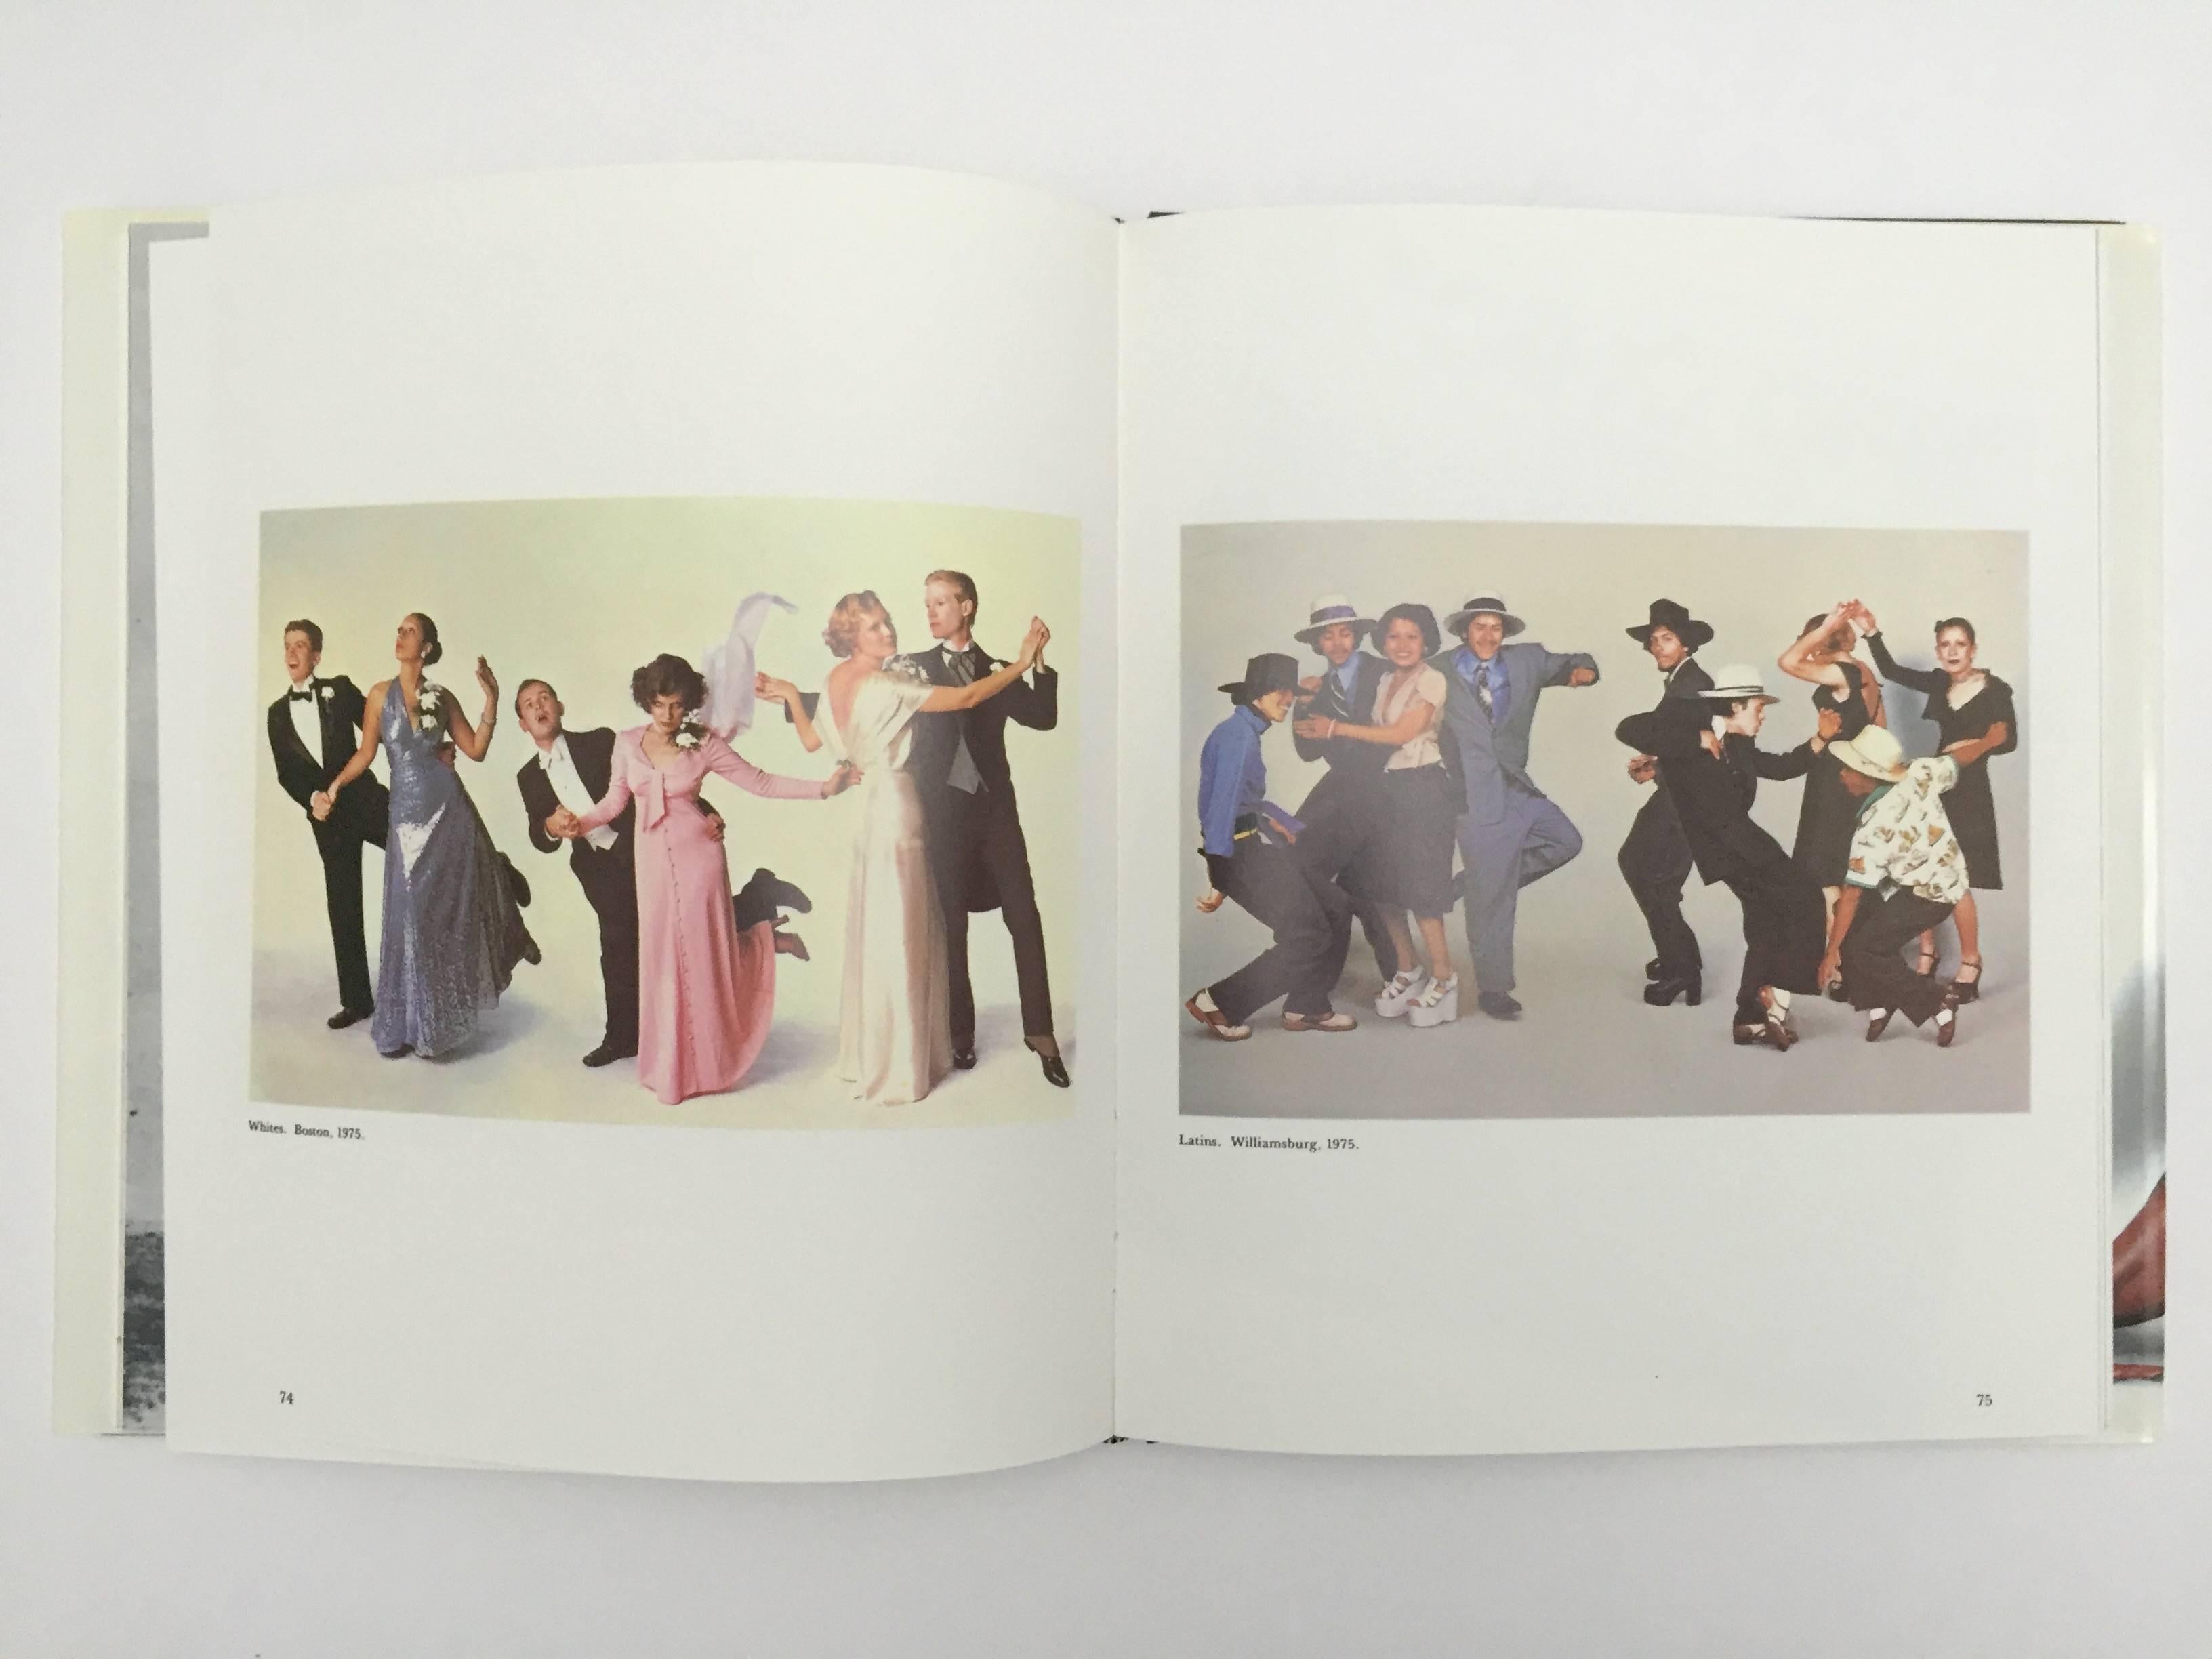 First edition.

Published by Xavier Moreau Inc., NY in 1981.

A collection of images featuring the work of photographer, graphic designer, artist and illustrator, Jean-Paul Goude. Described as a 